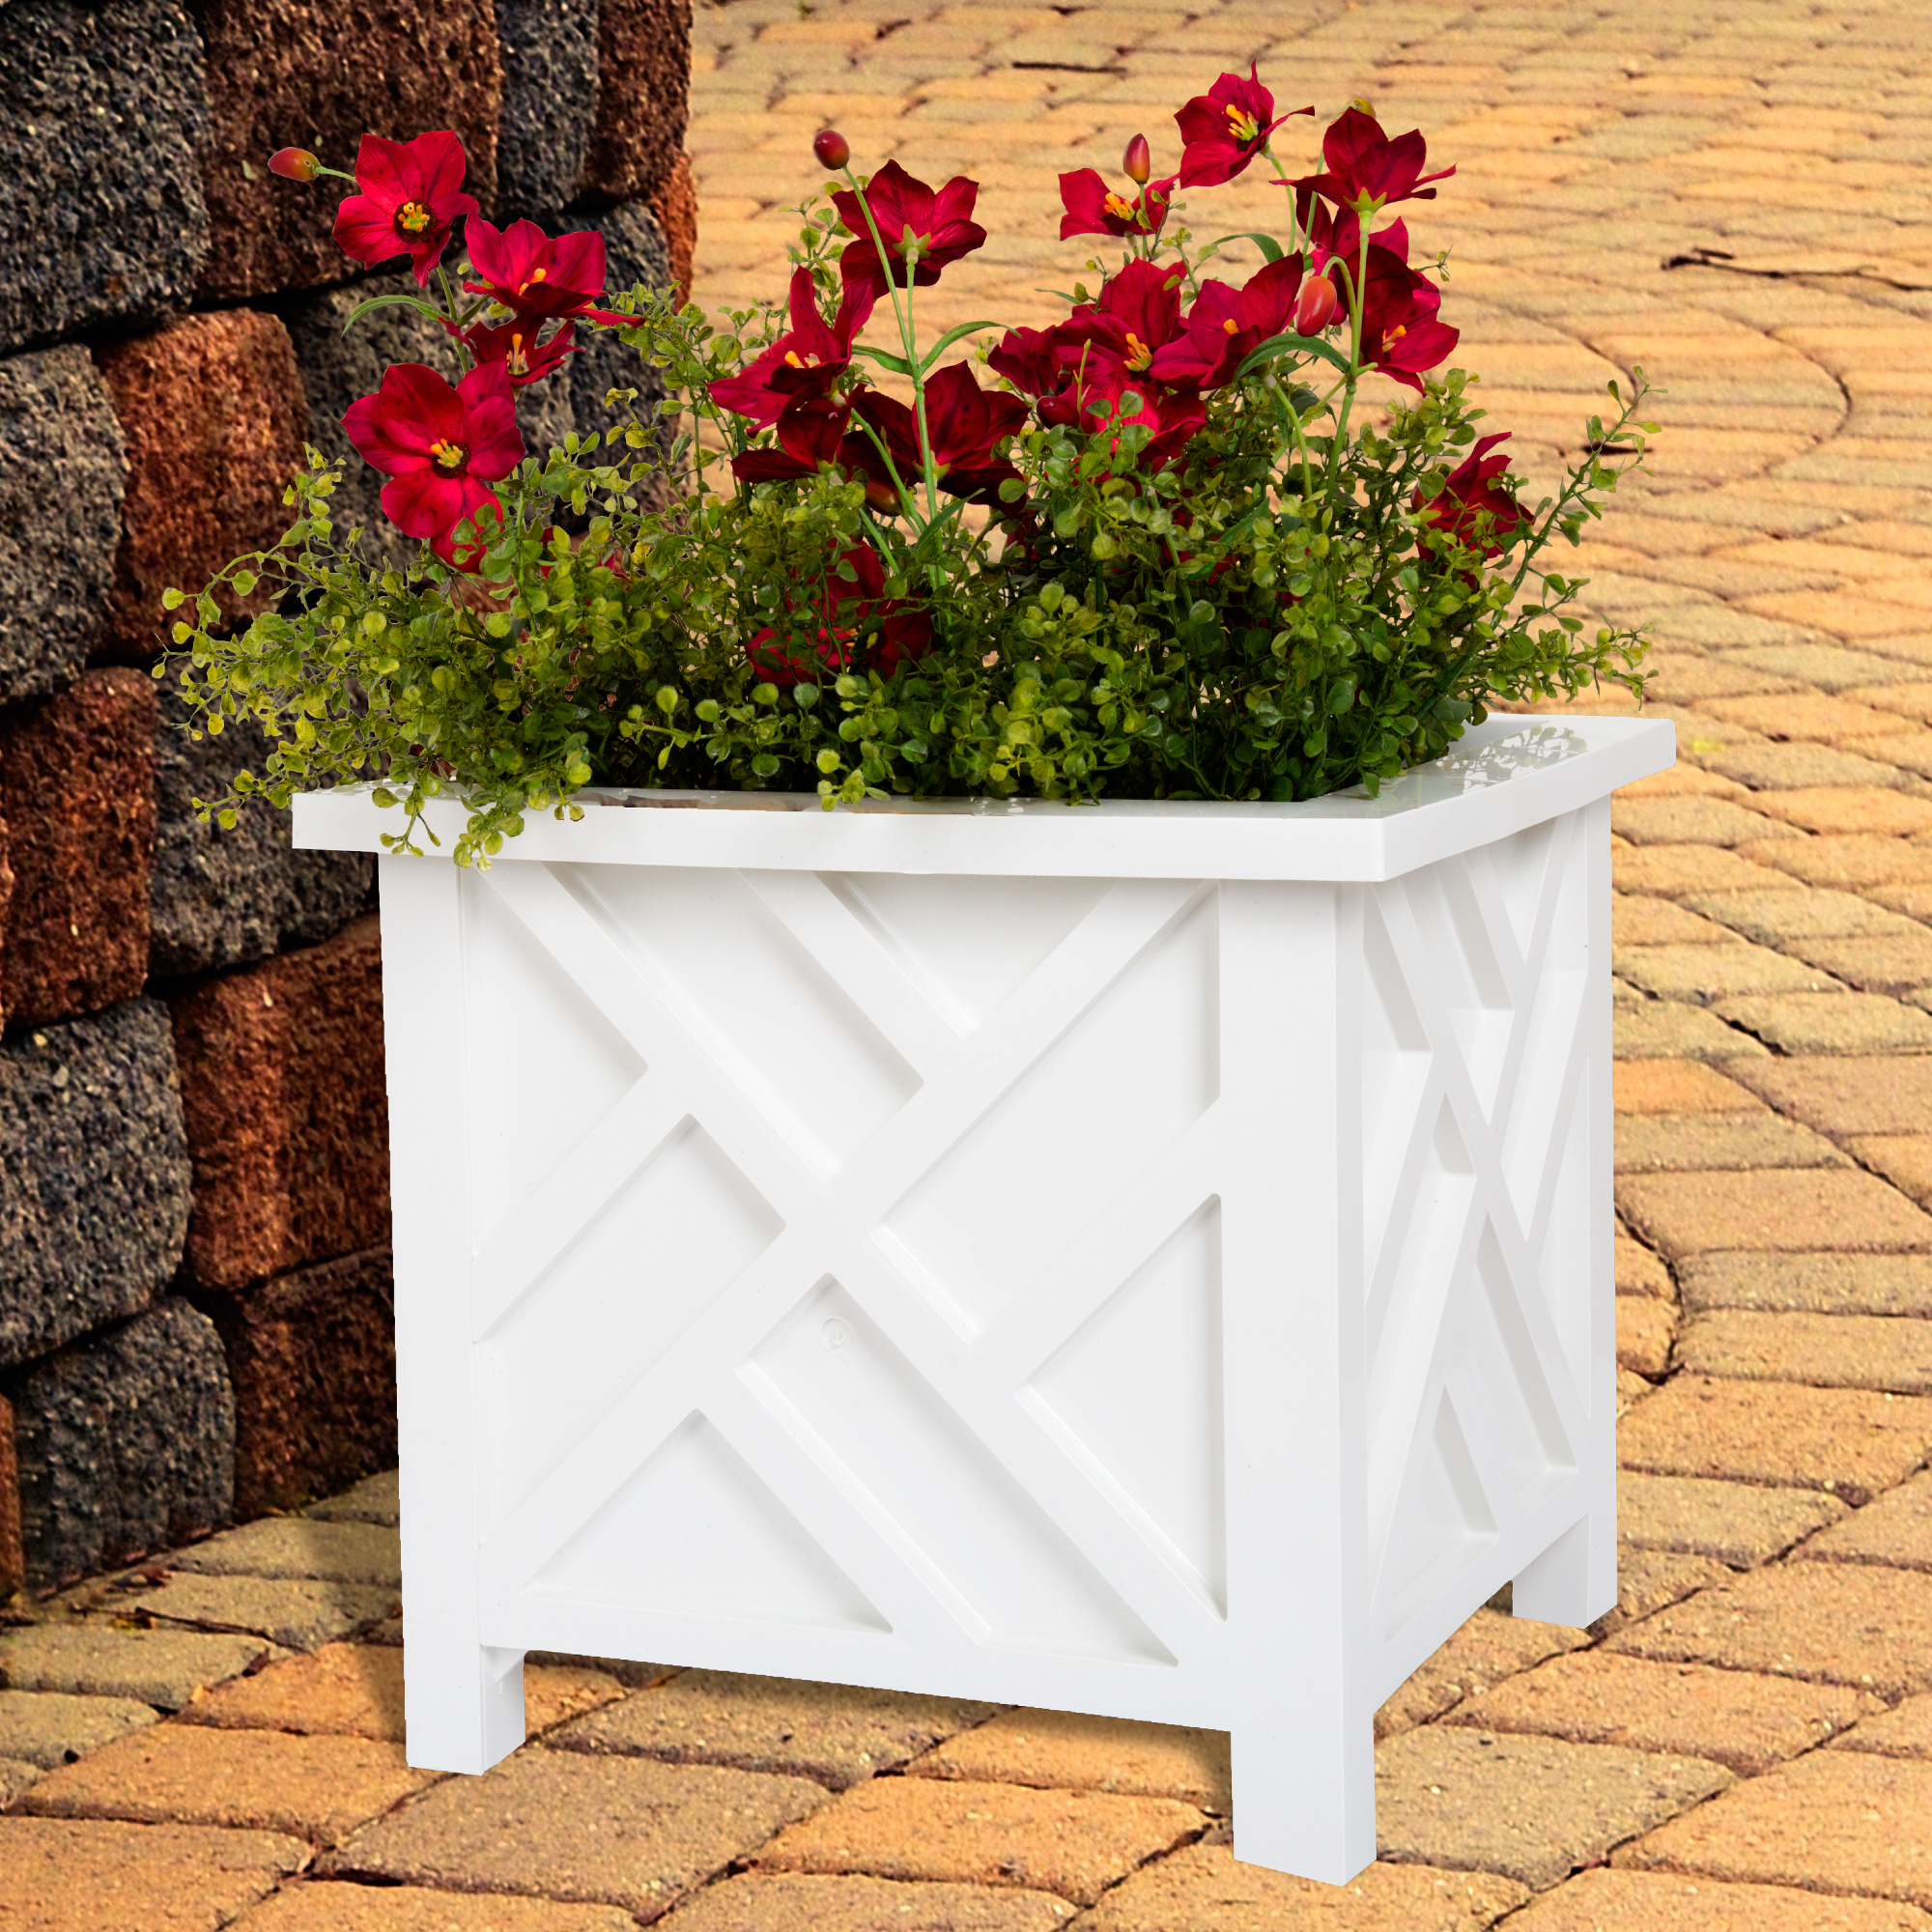 Plant Holder – Planter Container Box For Garden, Patio, And Lawn – Outdoor Decor